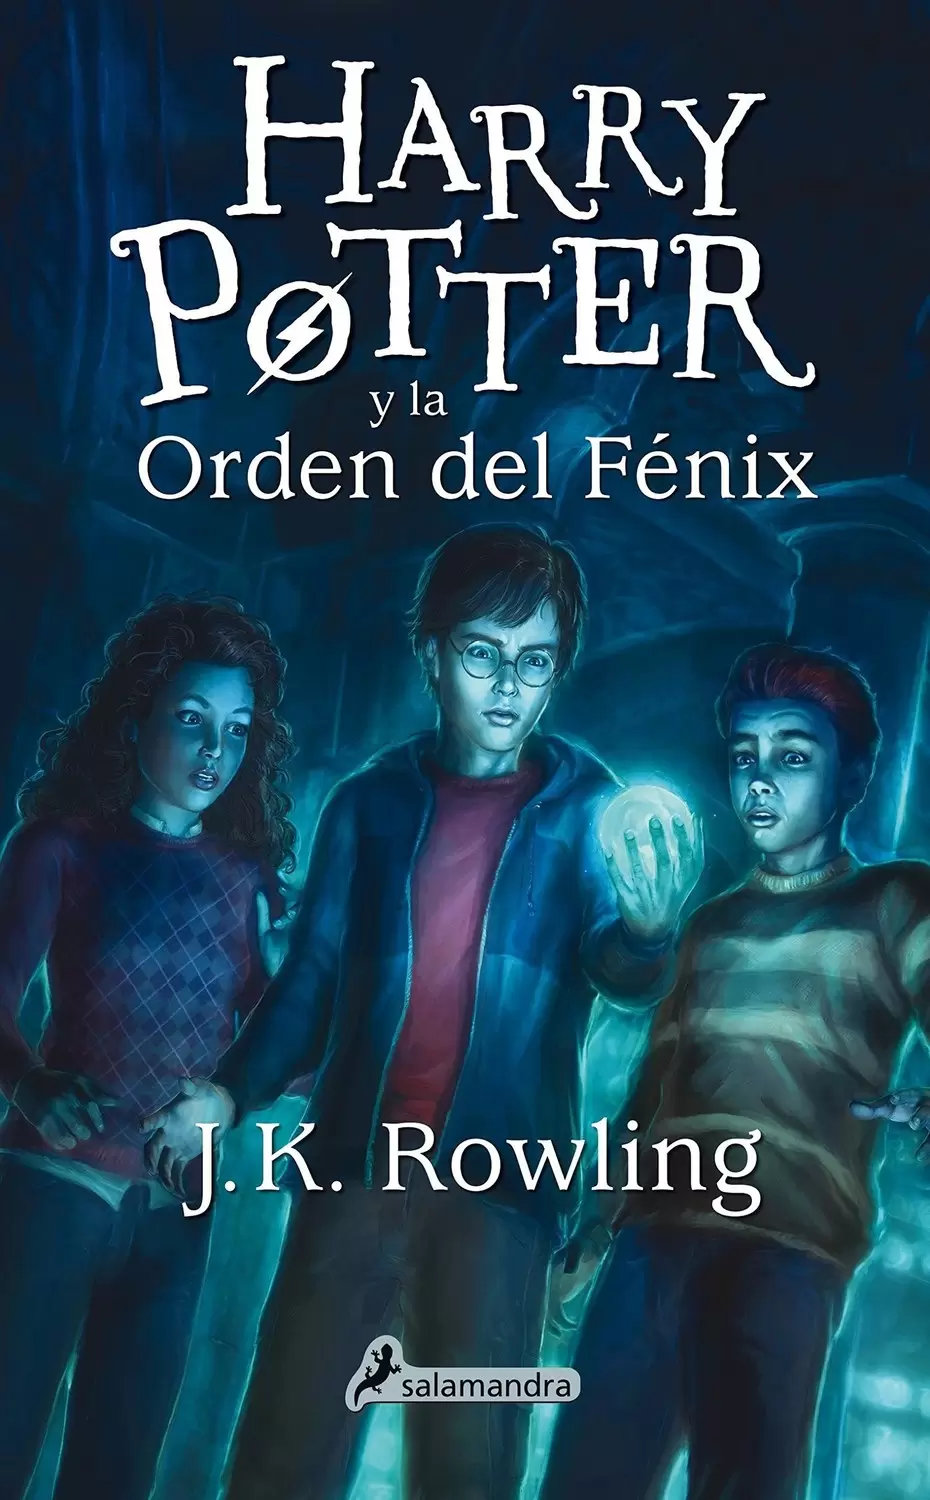 Livres Harry Potter et Animaux Fantastiques - Harry Potter and the Order of the Phoenix